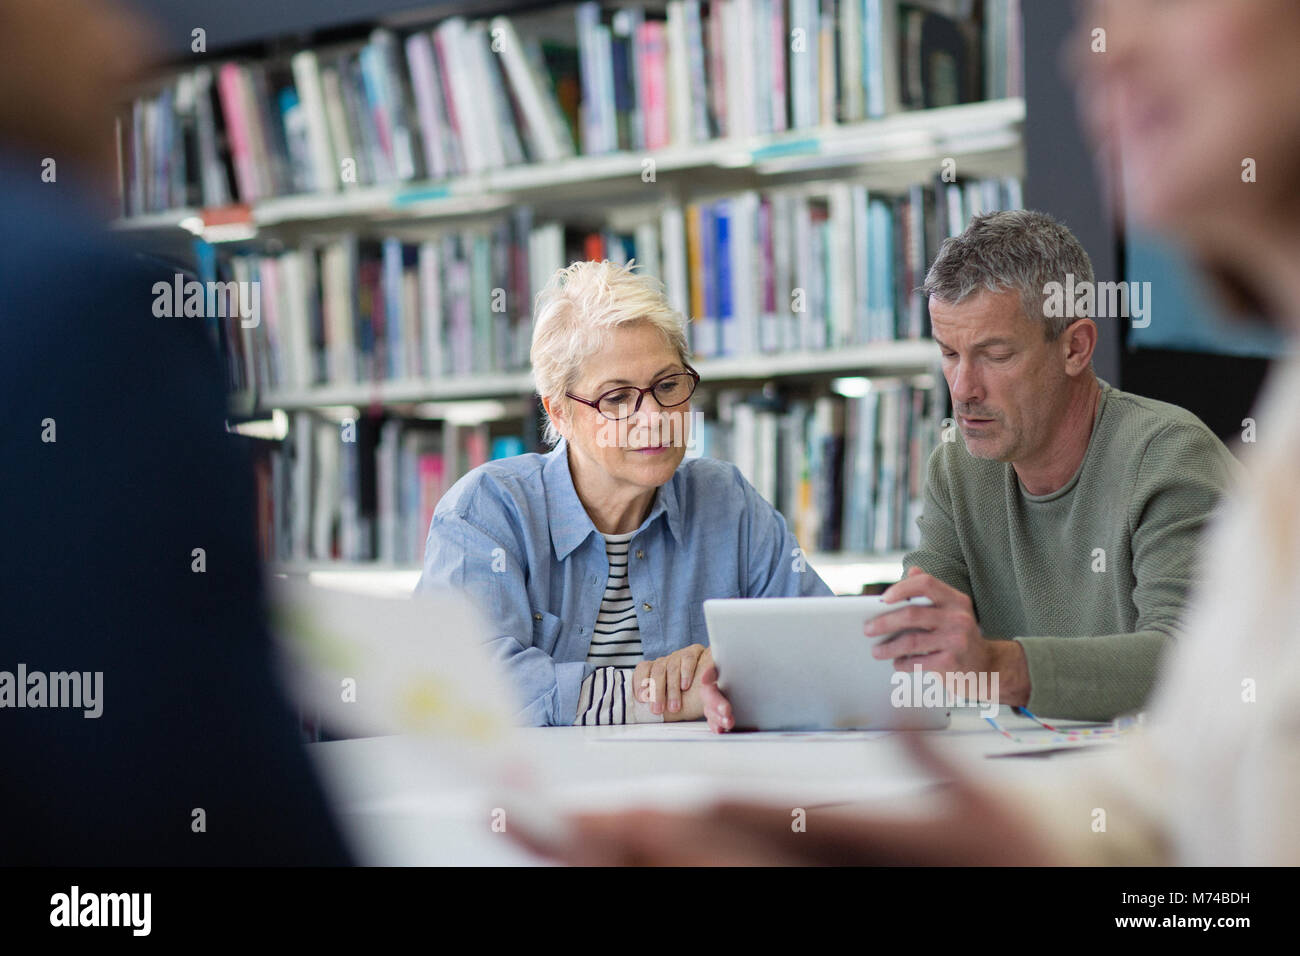 Senior woman learning how to use digital tablet Stock Photo